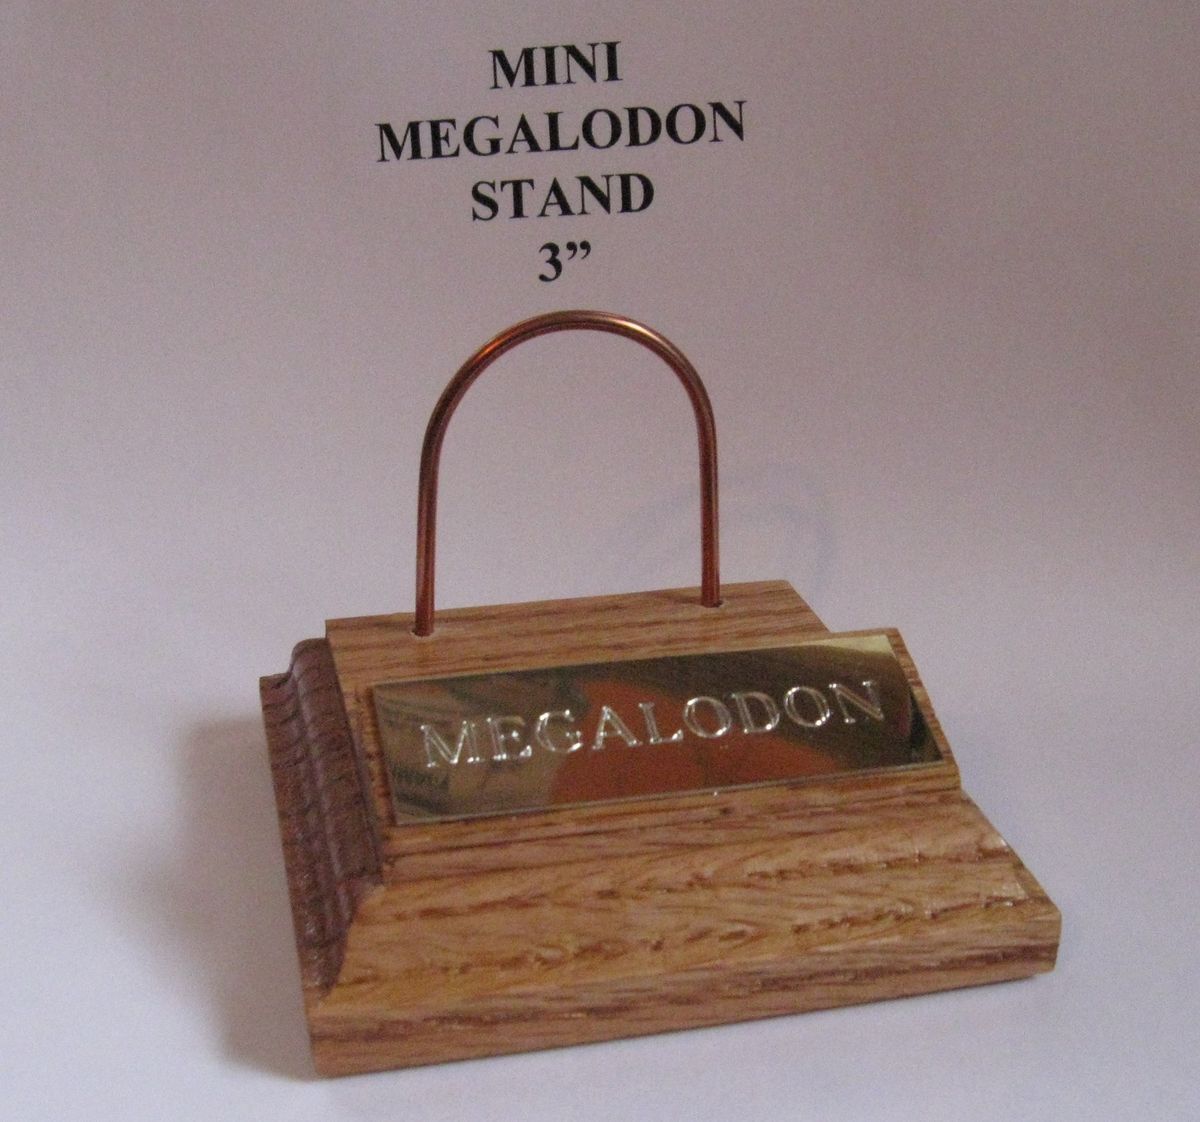 Megalodon Mini Shark Tooth Teeth Stand Gold Engraved Plaque 3x3Mini